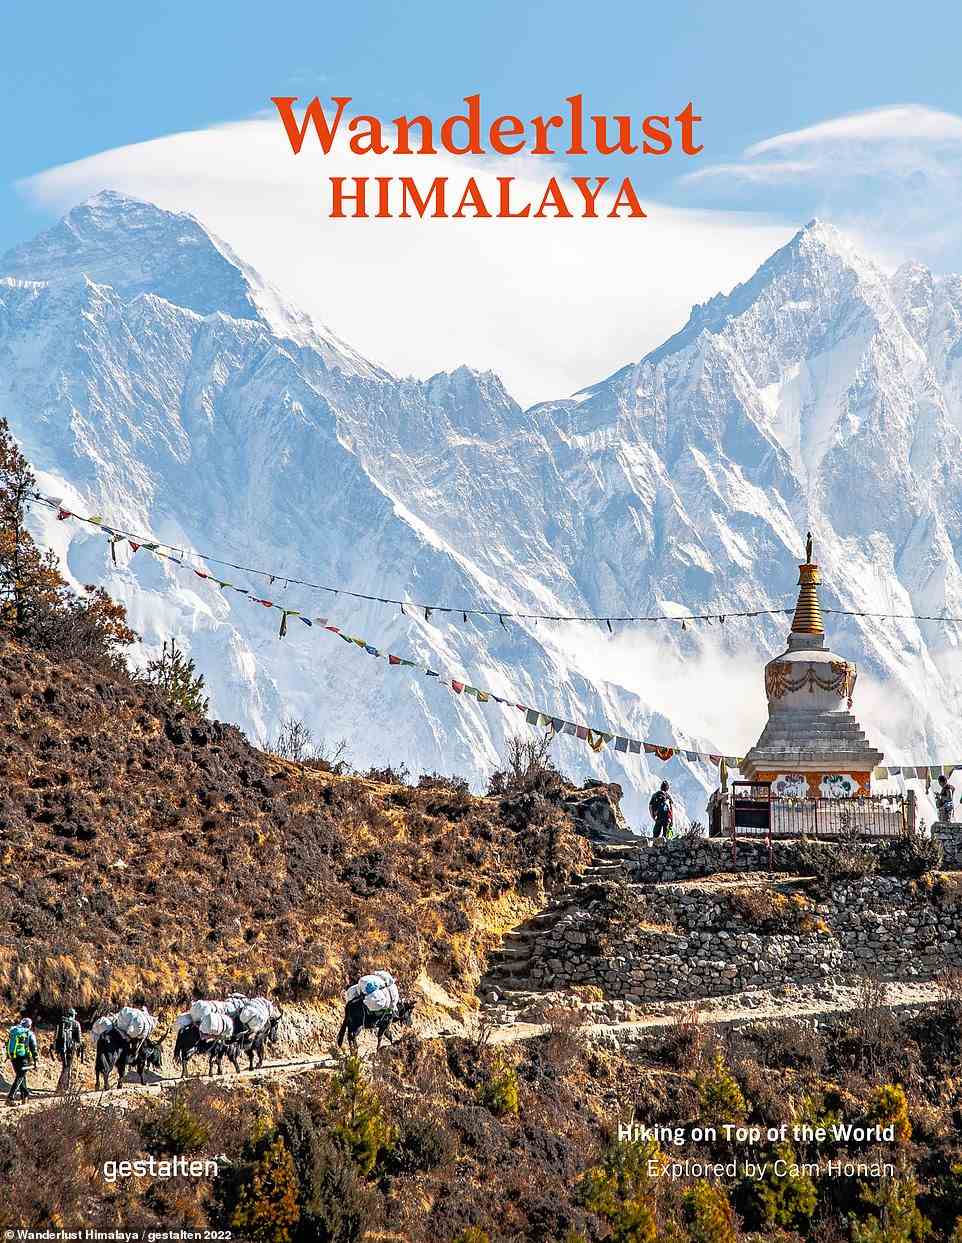 Wanderlust Himalaya by Cam Honan is published by Gestalten and is available to buy (£35) with free shipping to the UK, Germany and the USA